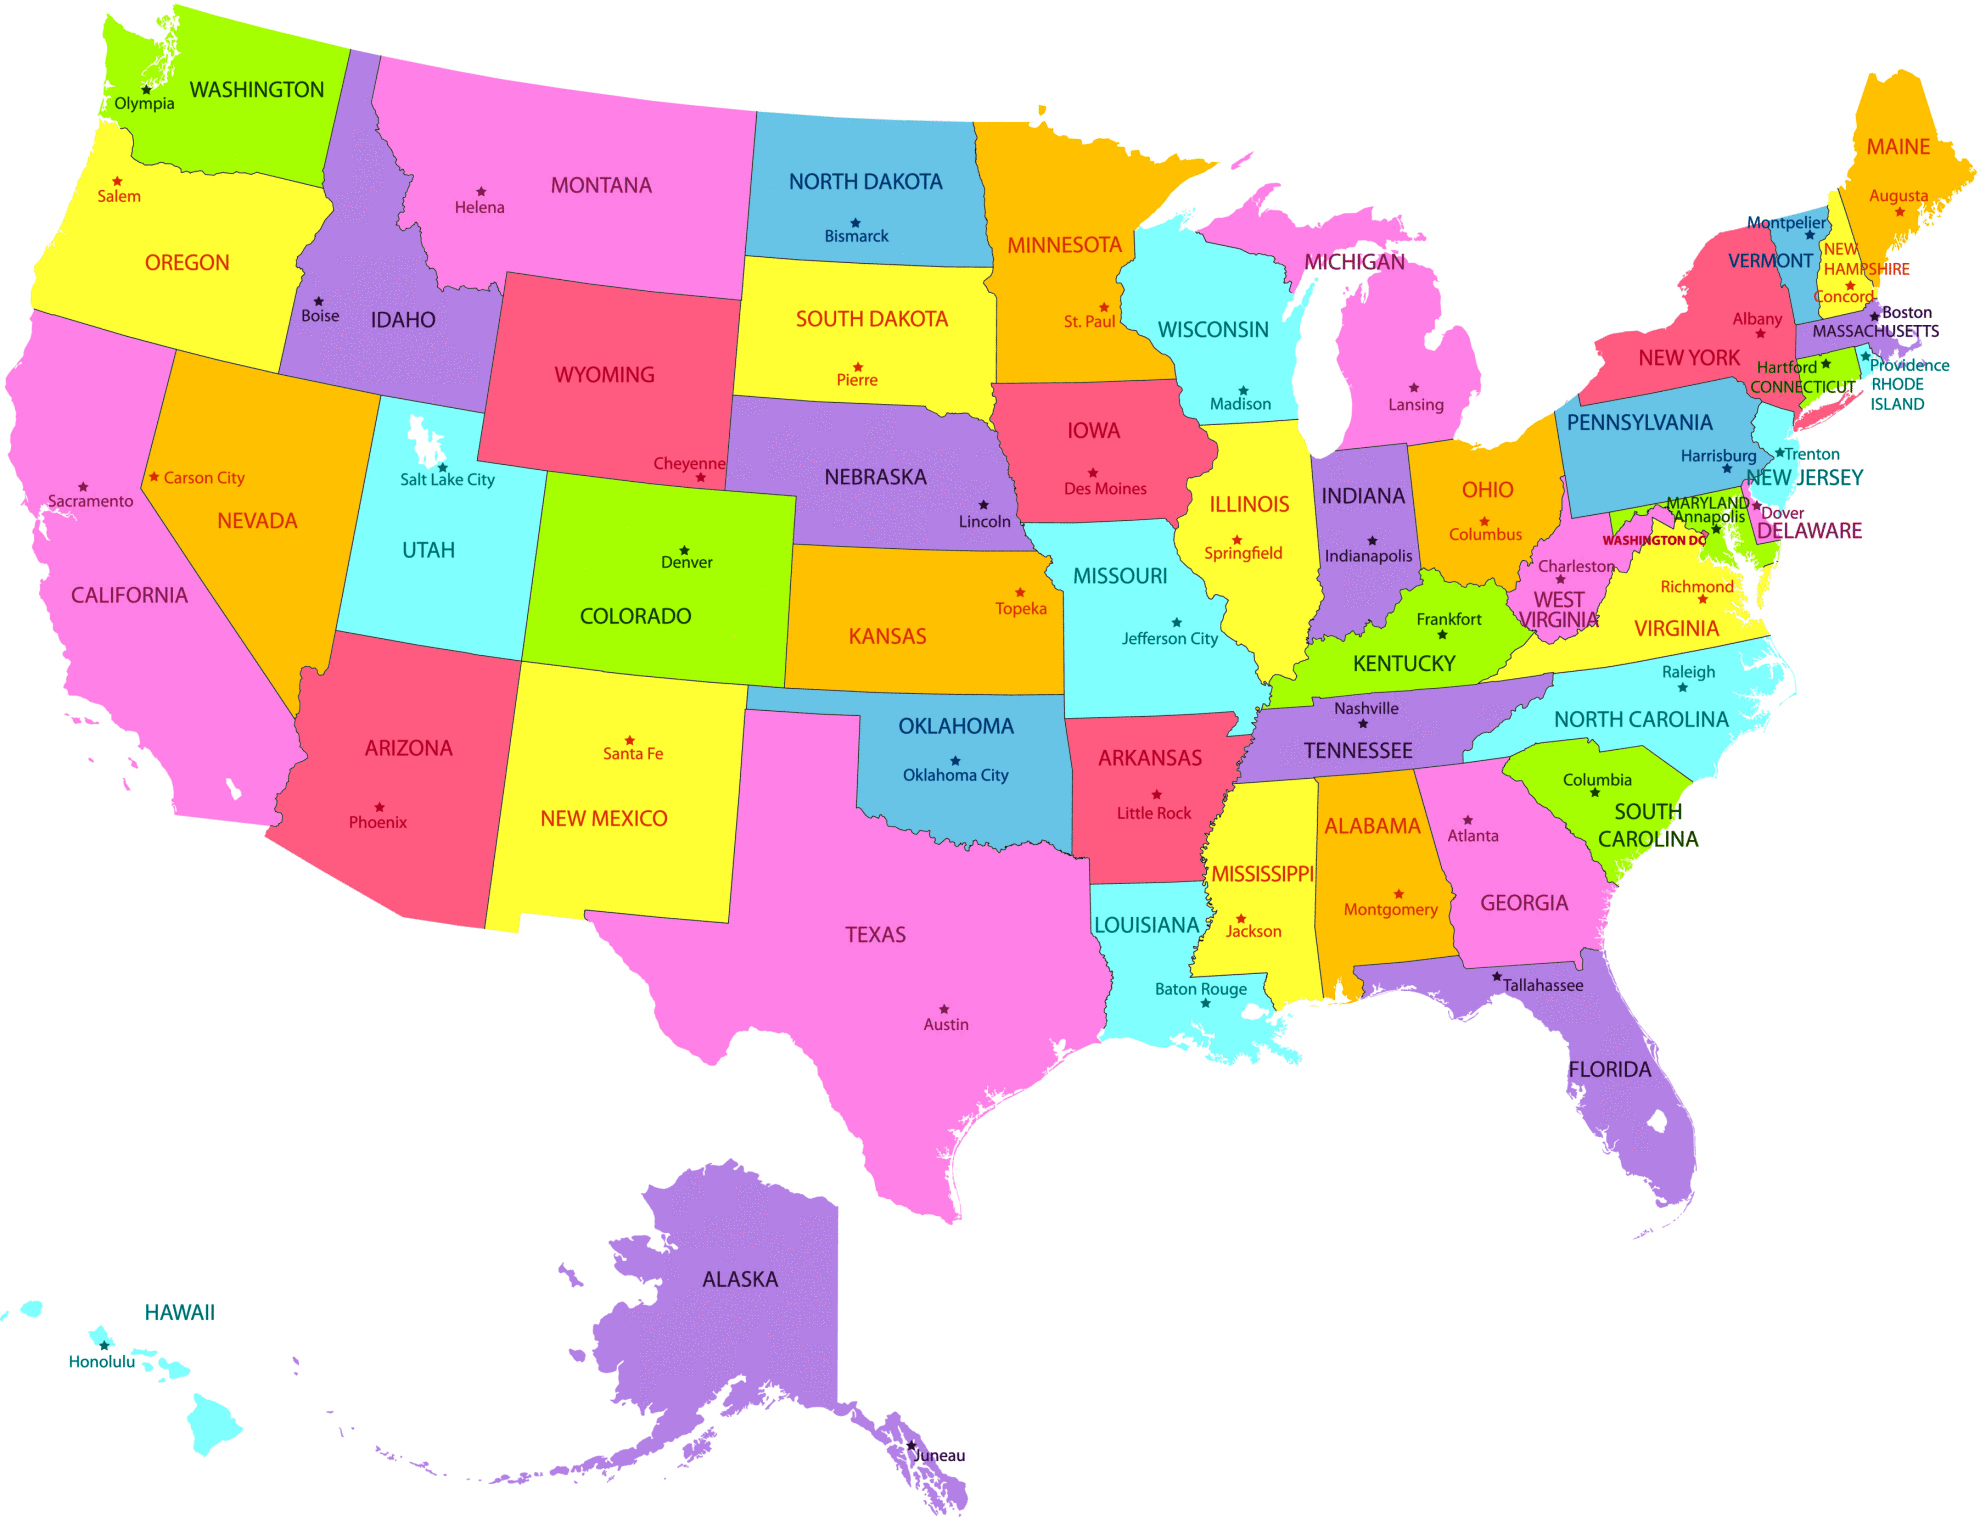 What's Really the Friendliest State?